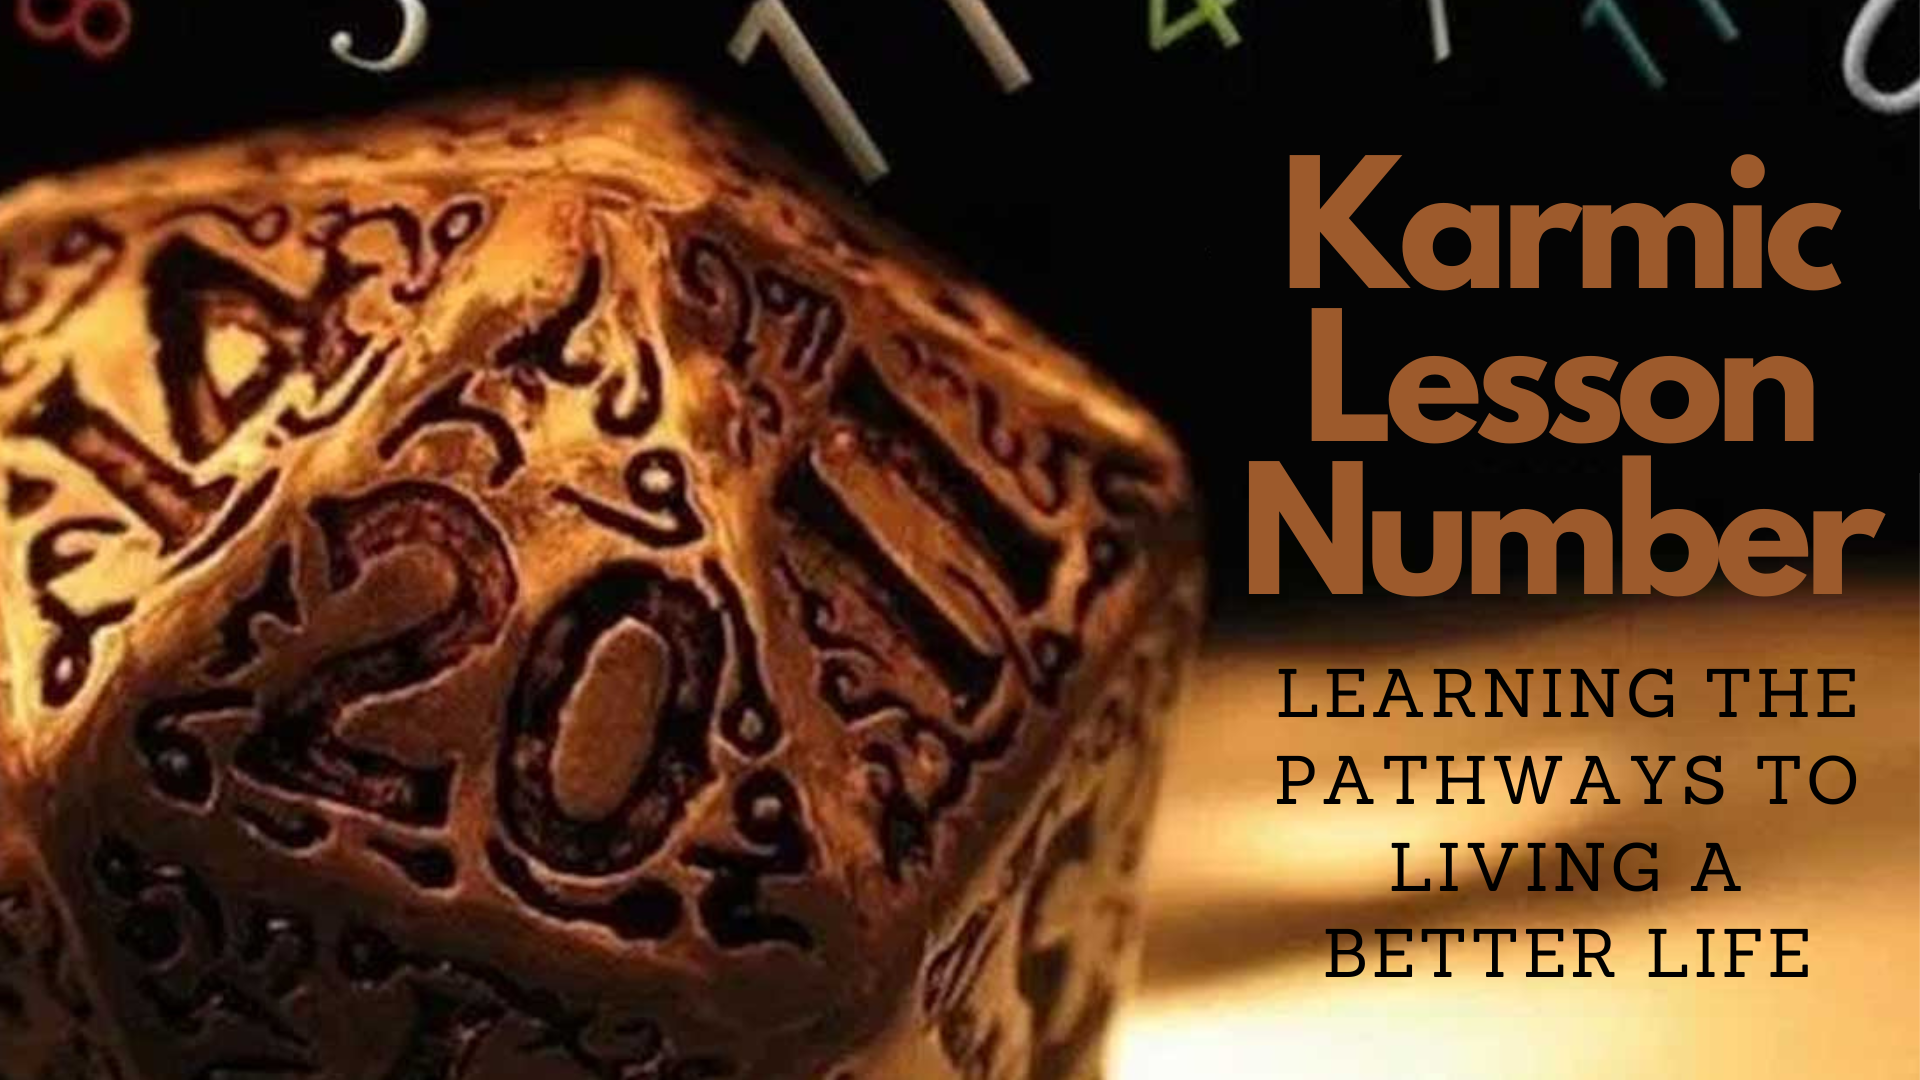 Karmic Lesson Number - Learning The Pathways To Living A Better Life